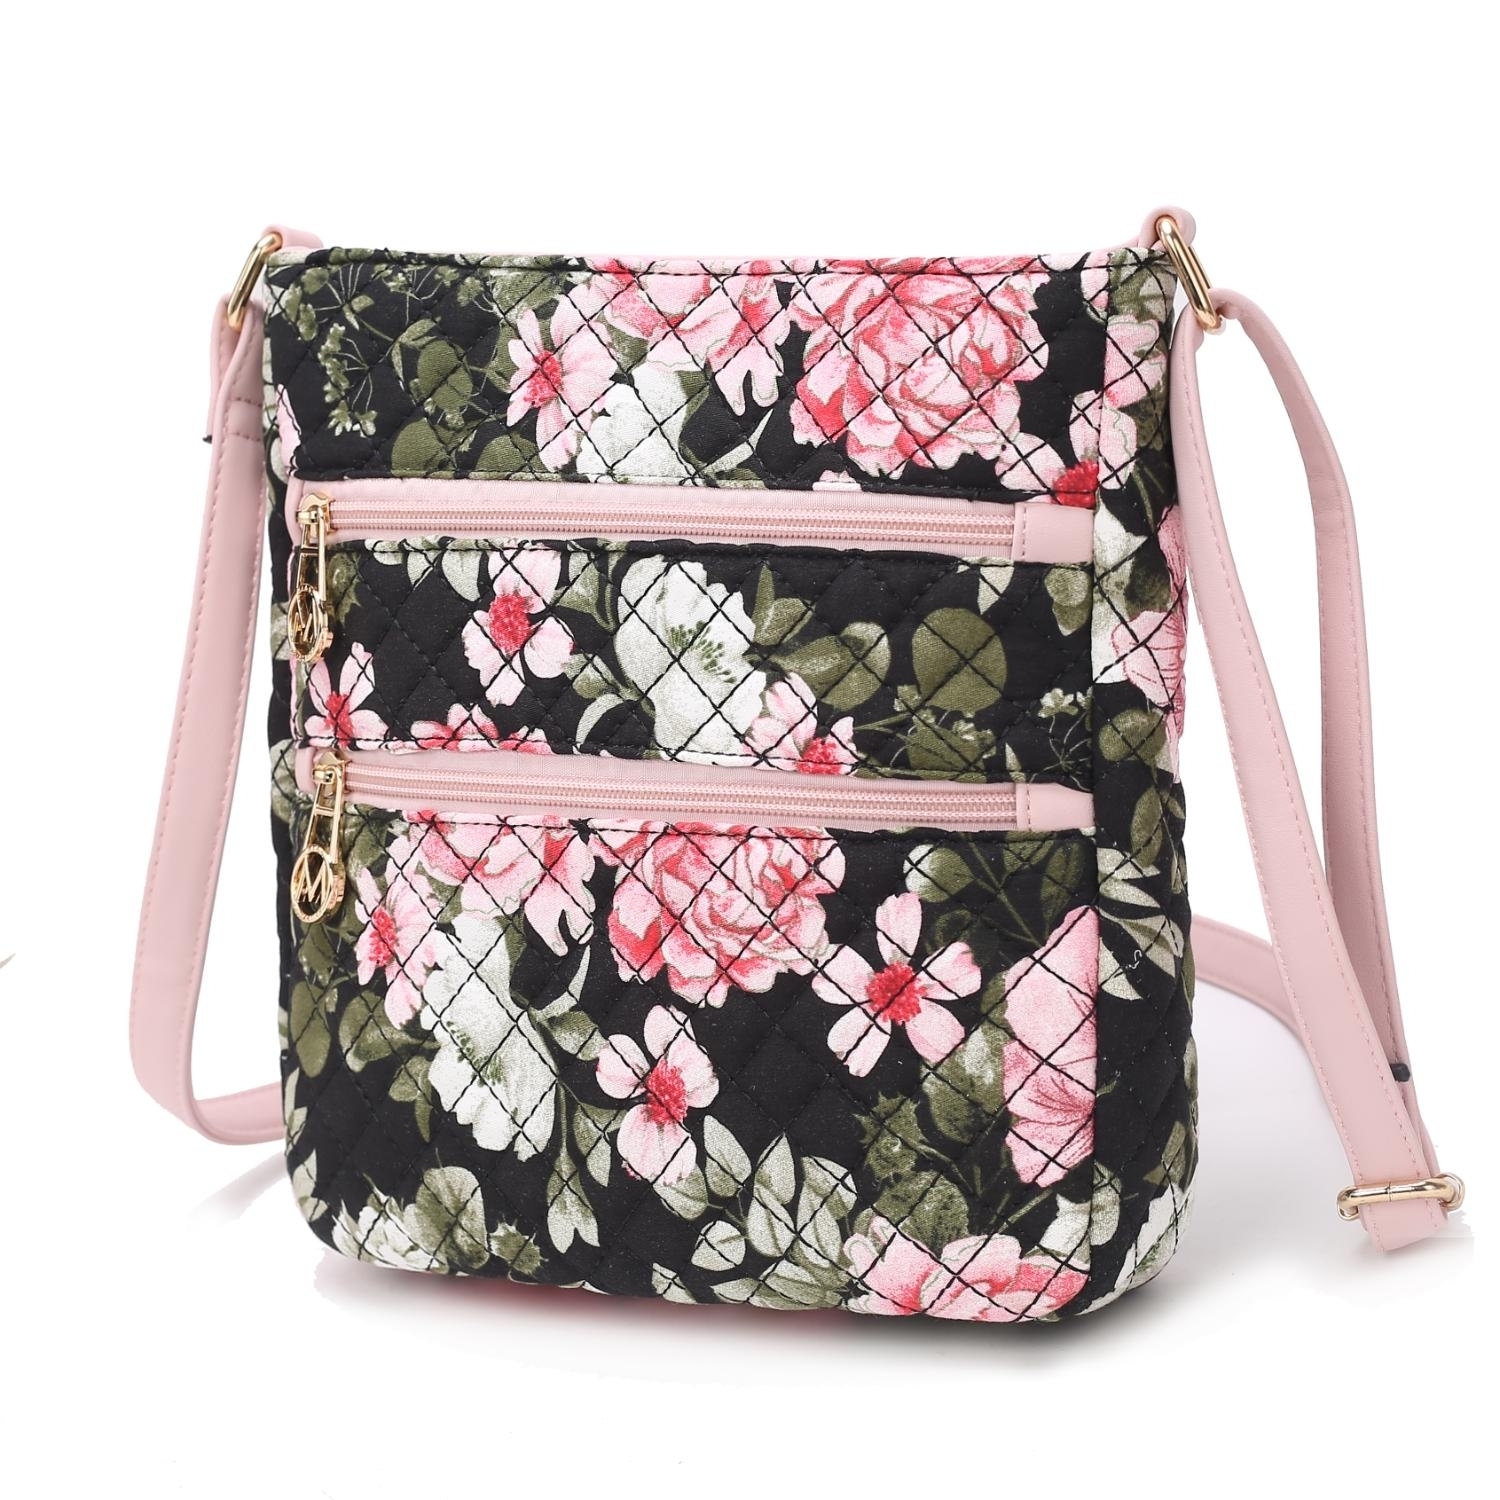 MKF Collection Lainey Quilted Cotton Botanical Pattern Women's Crossbody By Mia K - Navy